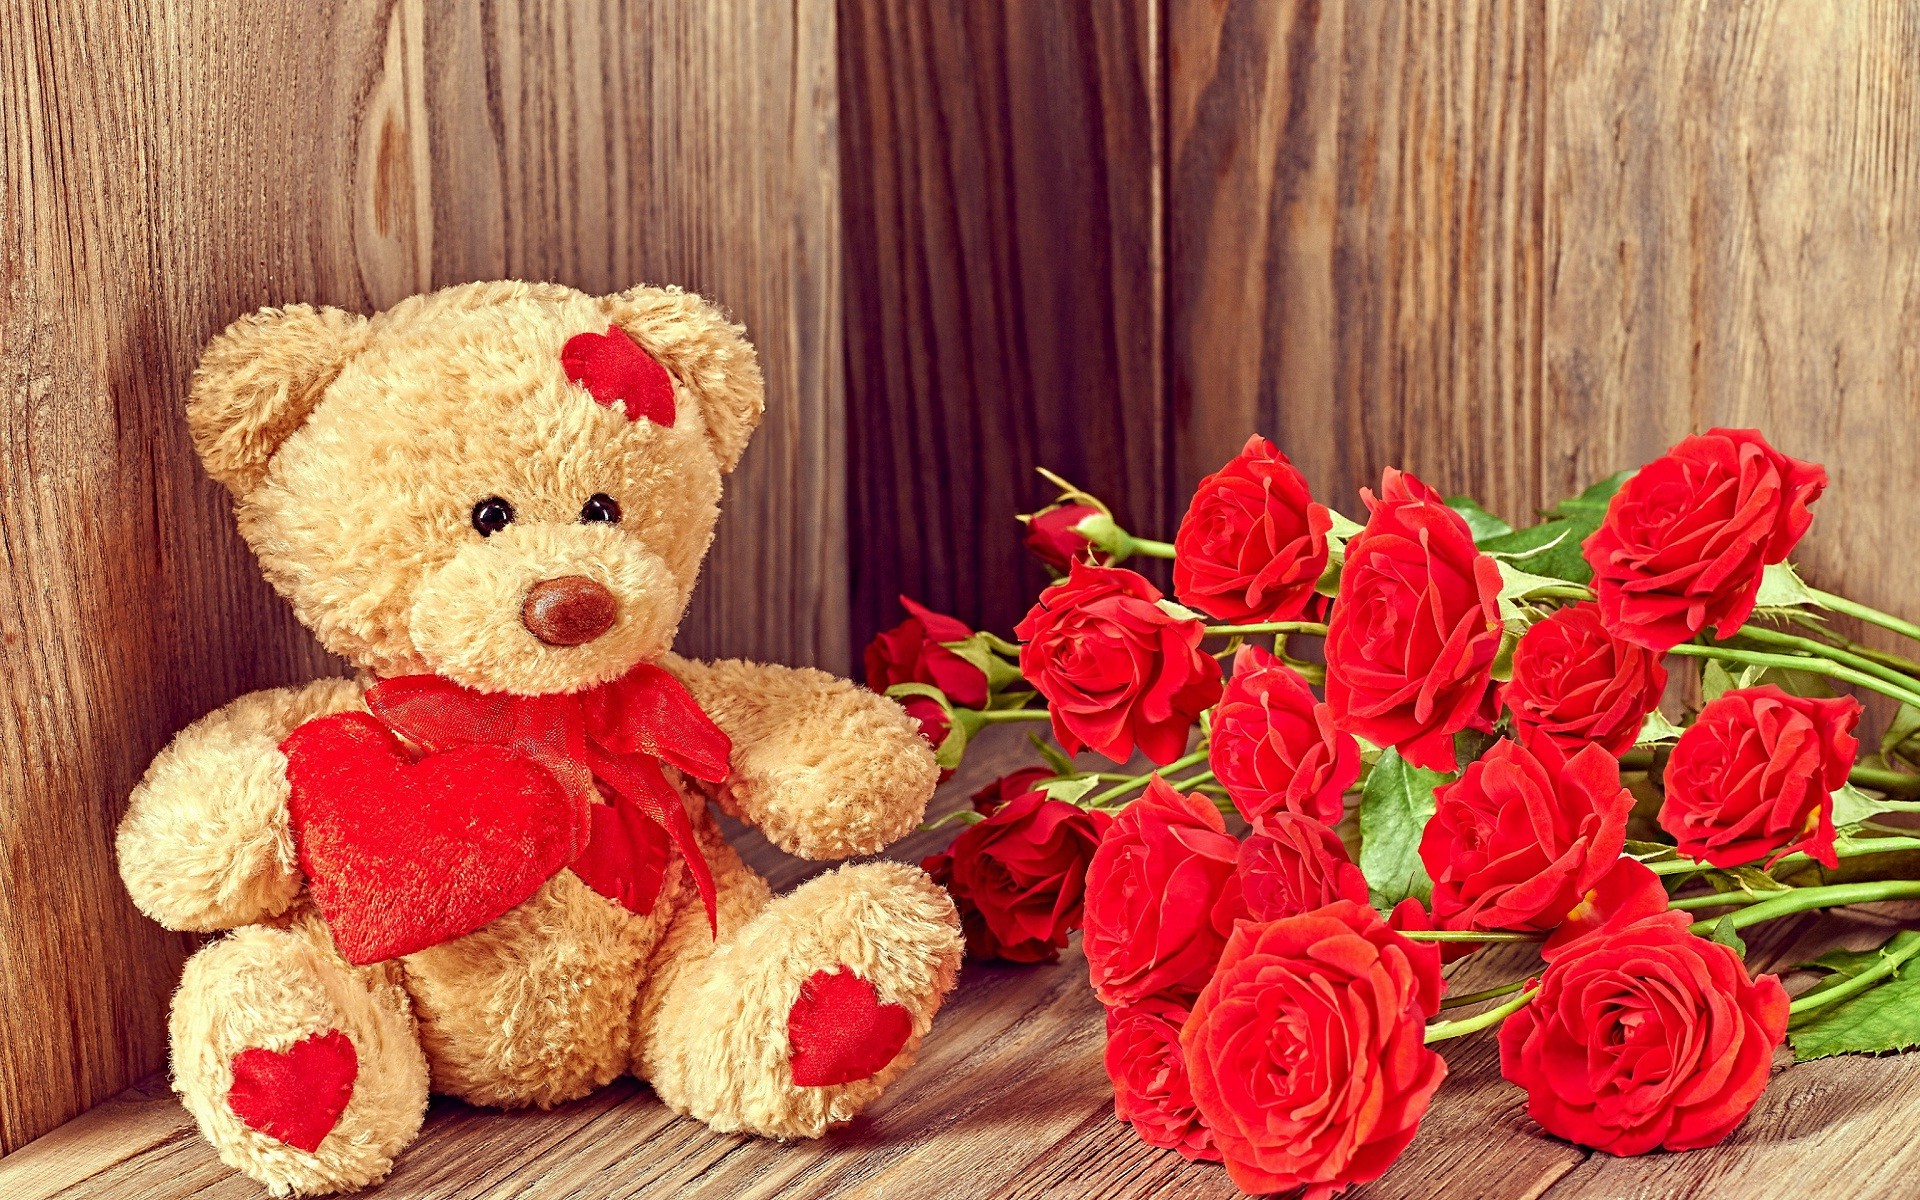 1920x1200 Teddy bear wallpapers with flowers - photo#18